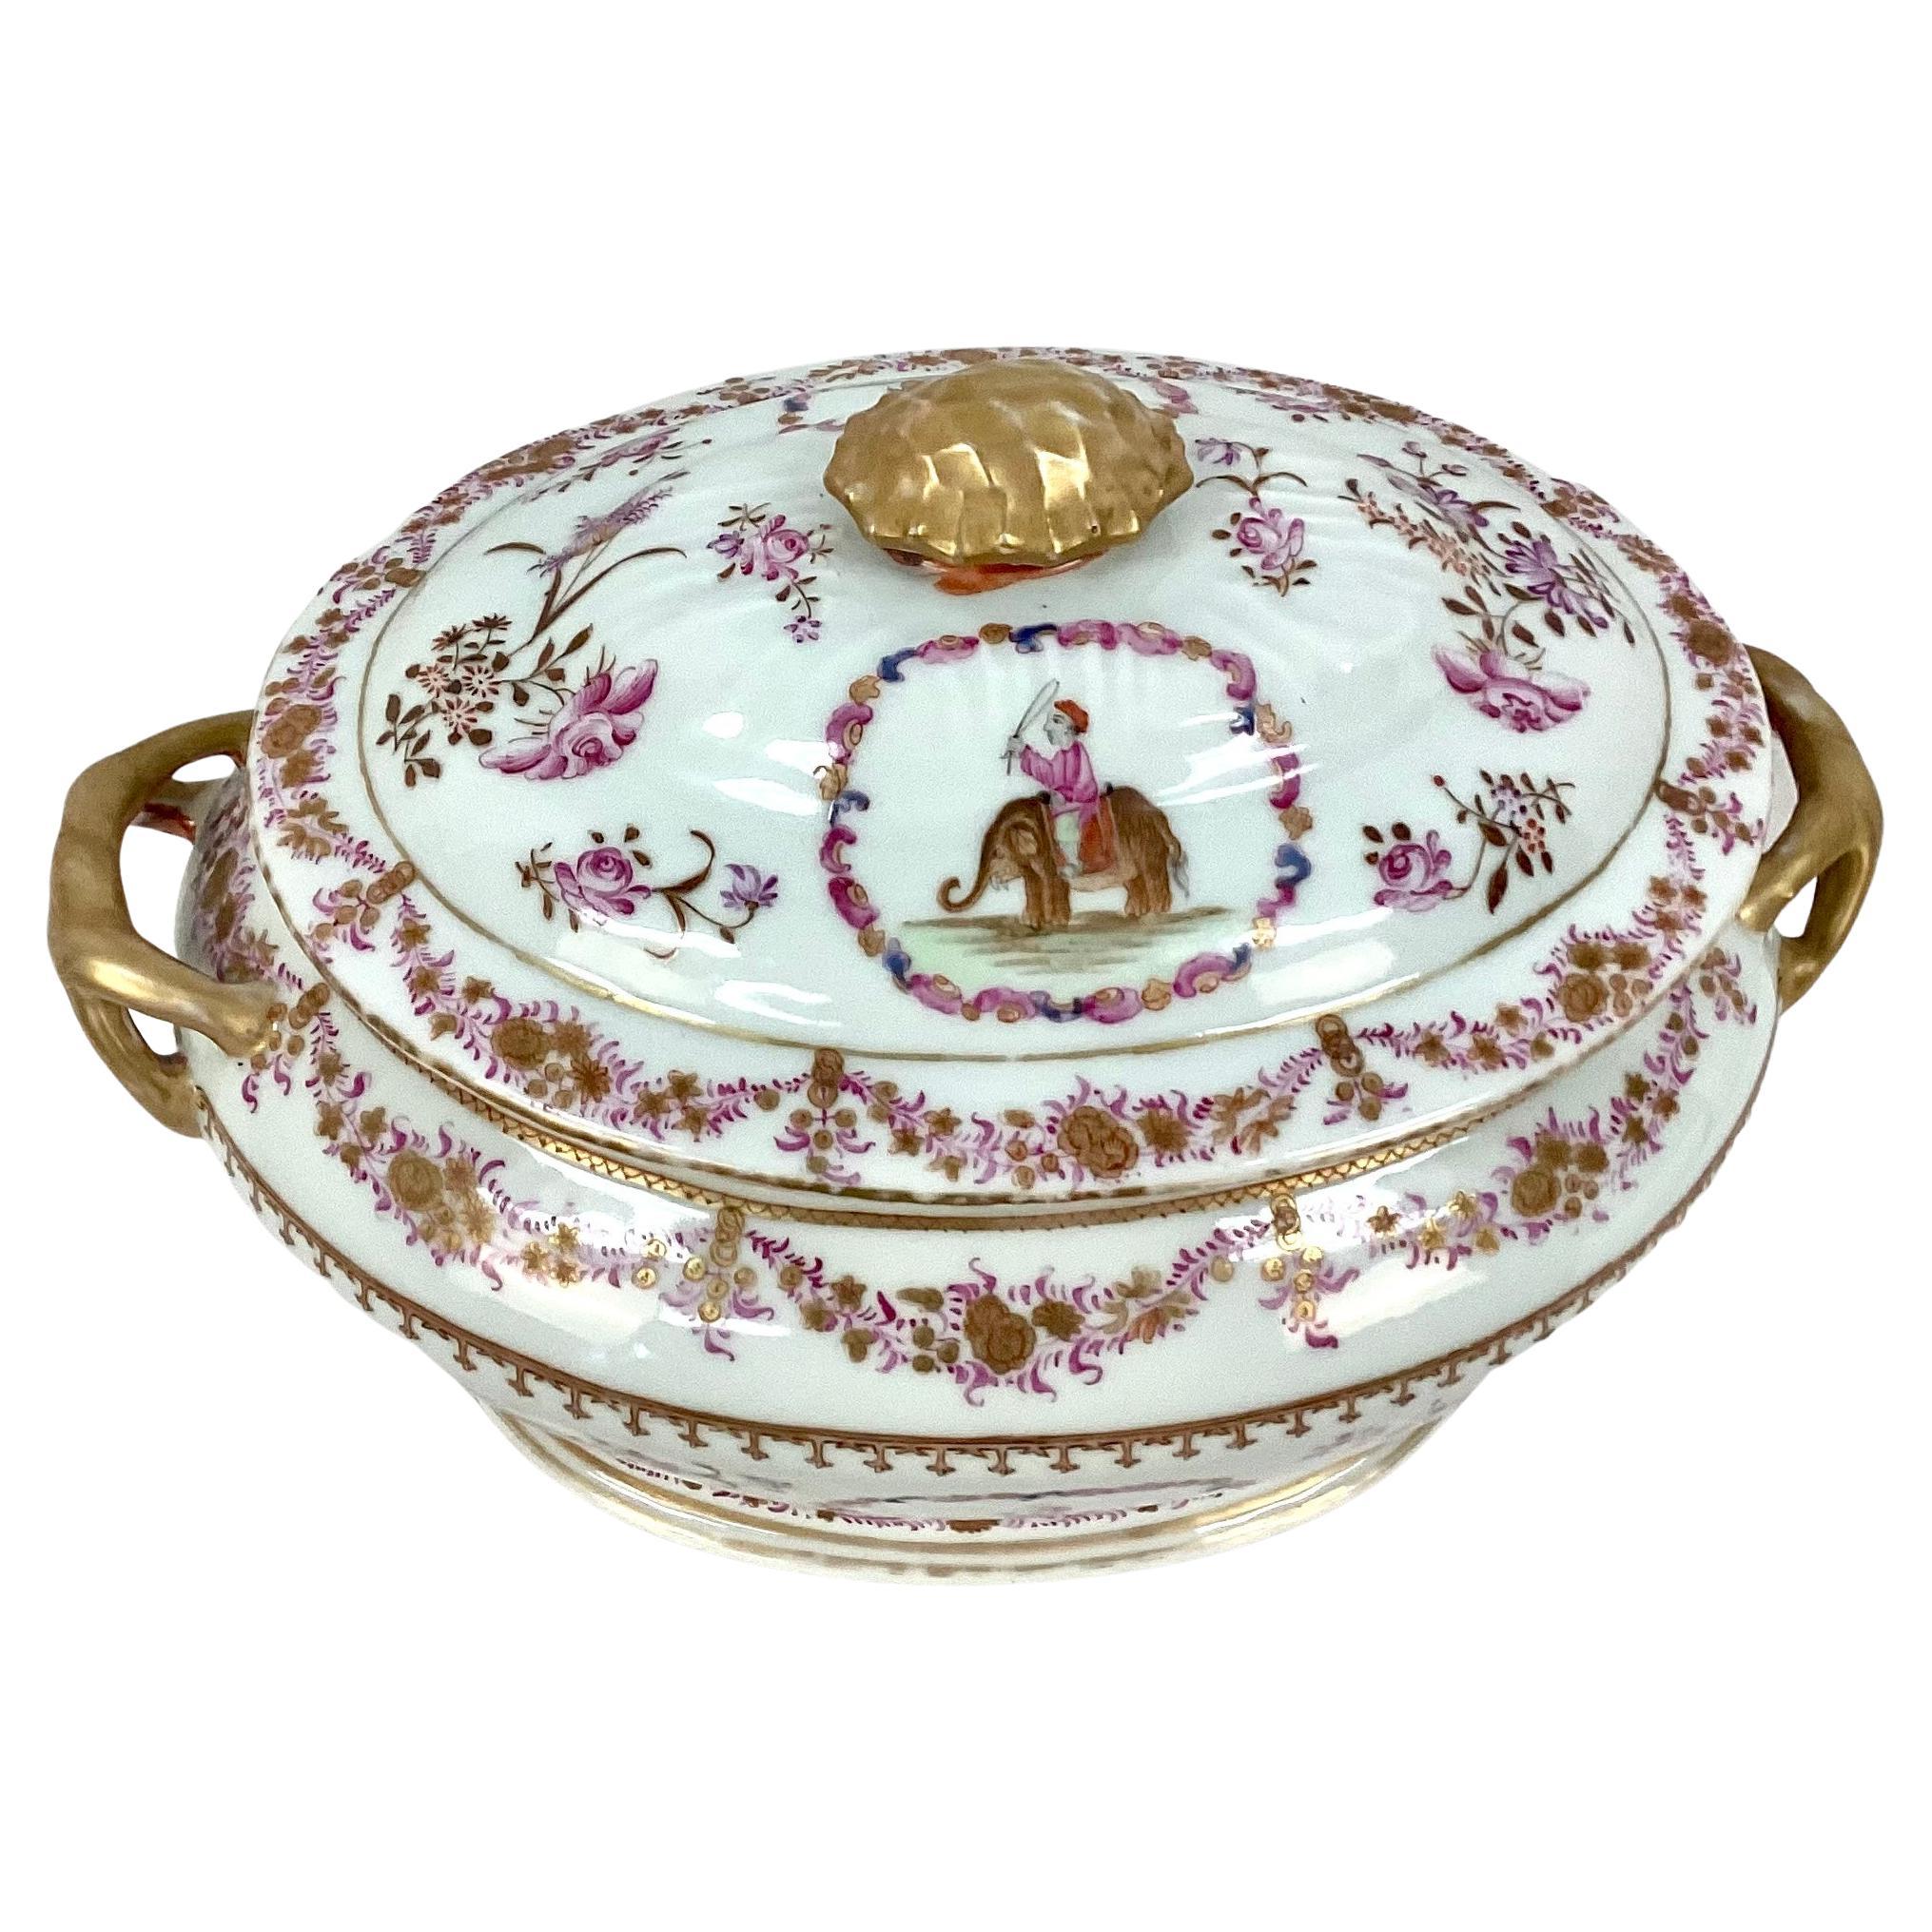 Chinese Export Famille rose porcelain soup tureen and underplate. Qianlong Period, decorated with the figure of a mahout astride an elephant and flower sprays with gold rim. The theme of this lot indicates that it was probably made for the European